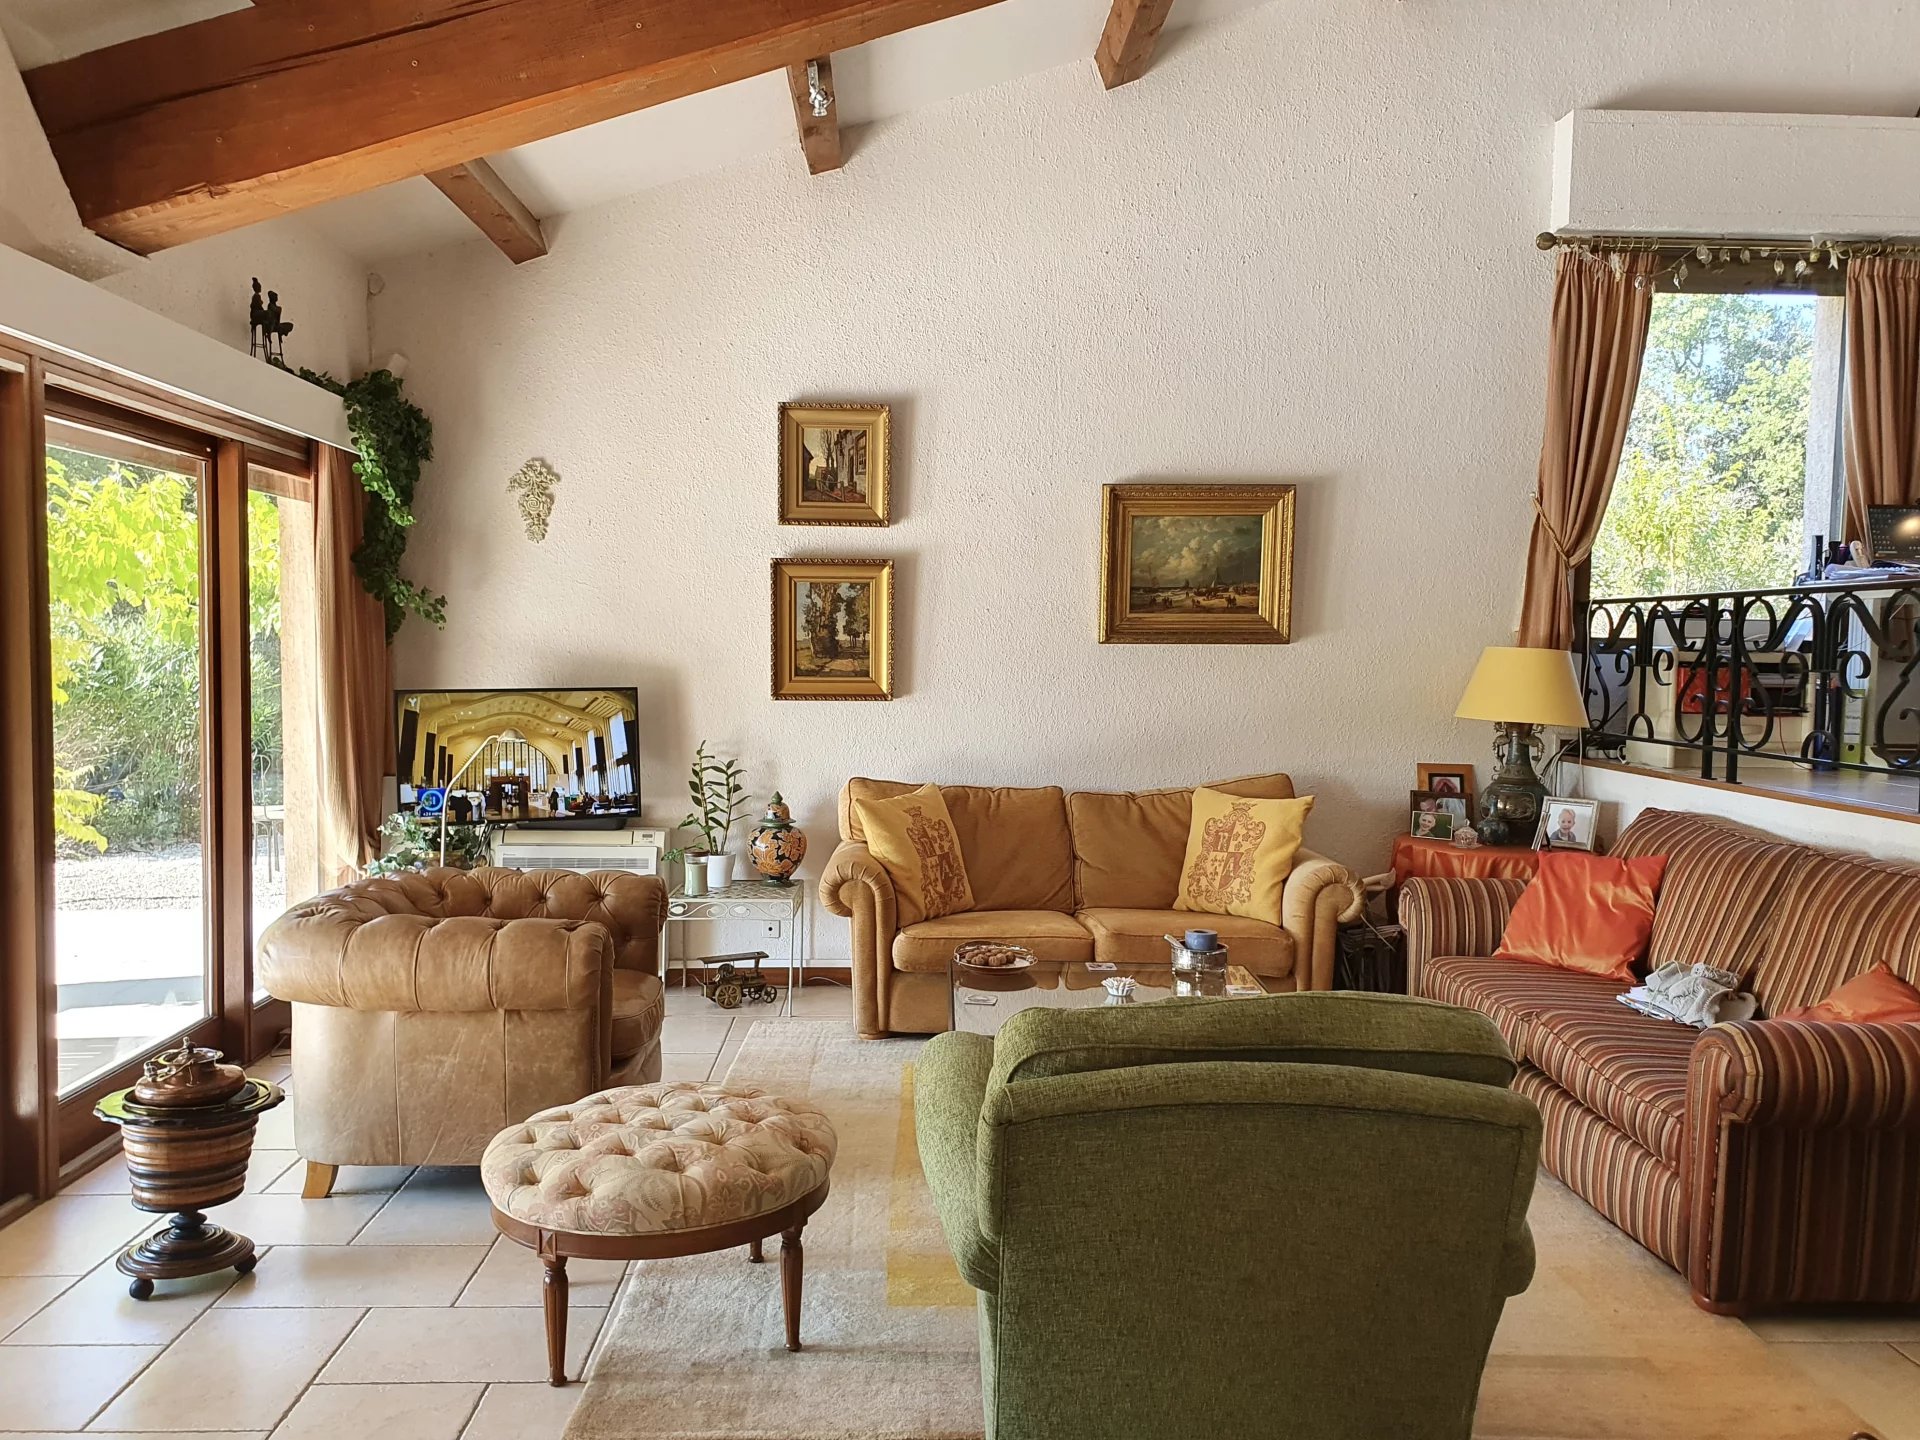 A home in the Provence,  villa 4 bedrooms and guesthouse.